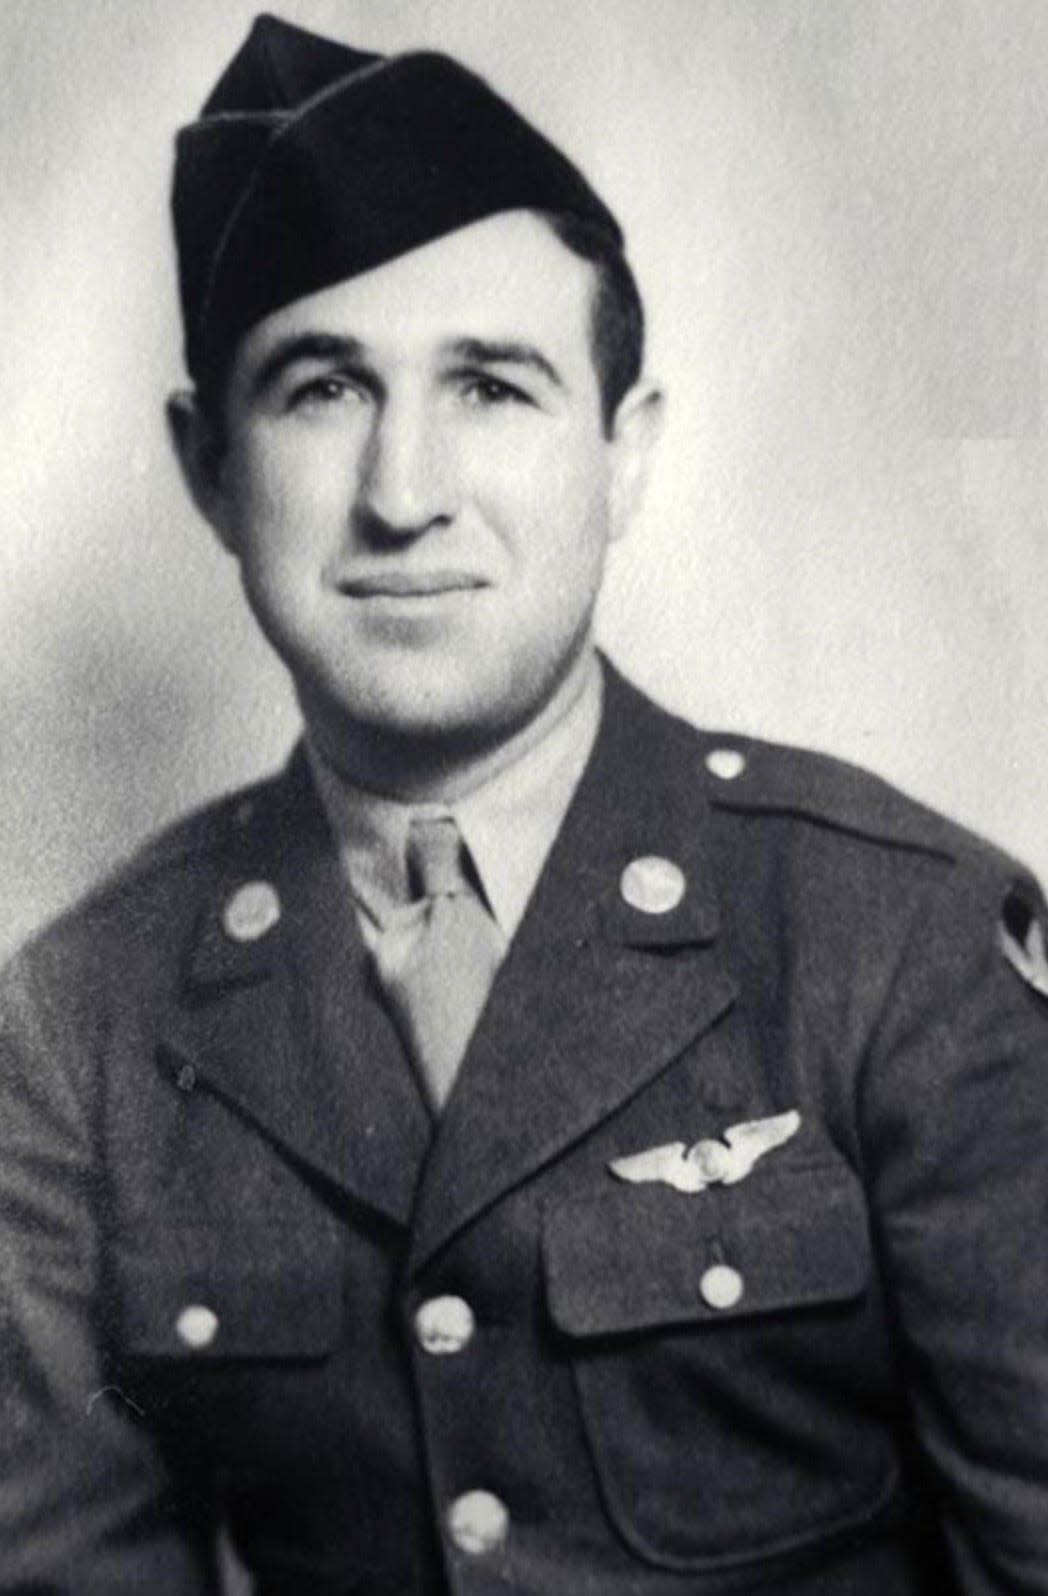 U.S. Army Air Forces Staff Sgt. Walter Nies, 23, of Eureka, was killed after he was captured in World War II. His remains were recovered and identified in August.